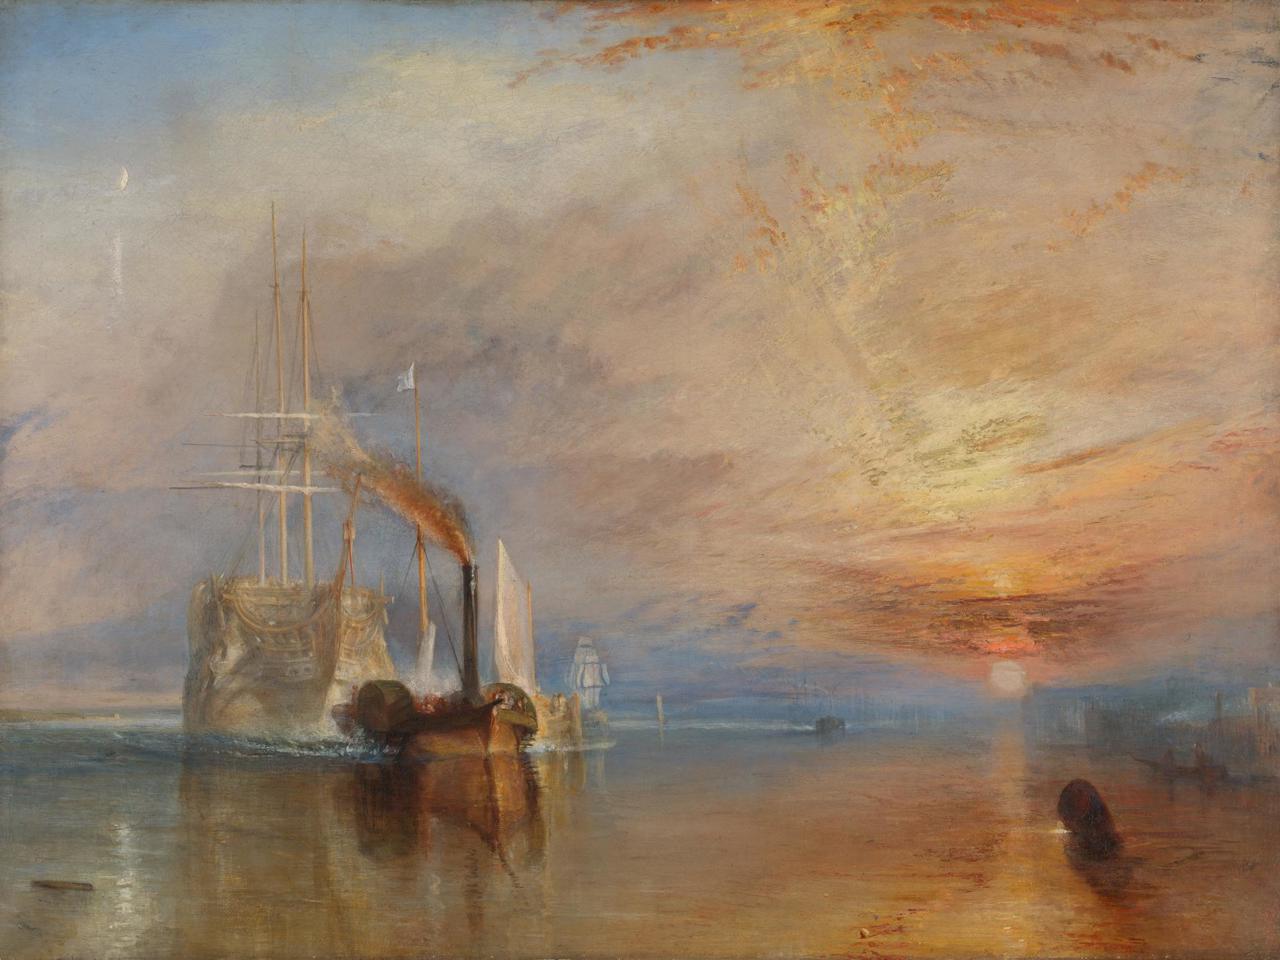 Joseph Mallord William Turner | The Fighting Temeraire | NG524 | National Gallery, London